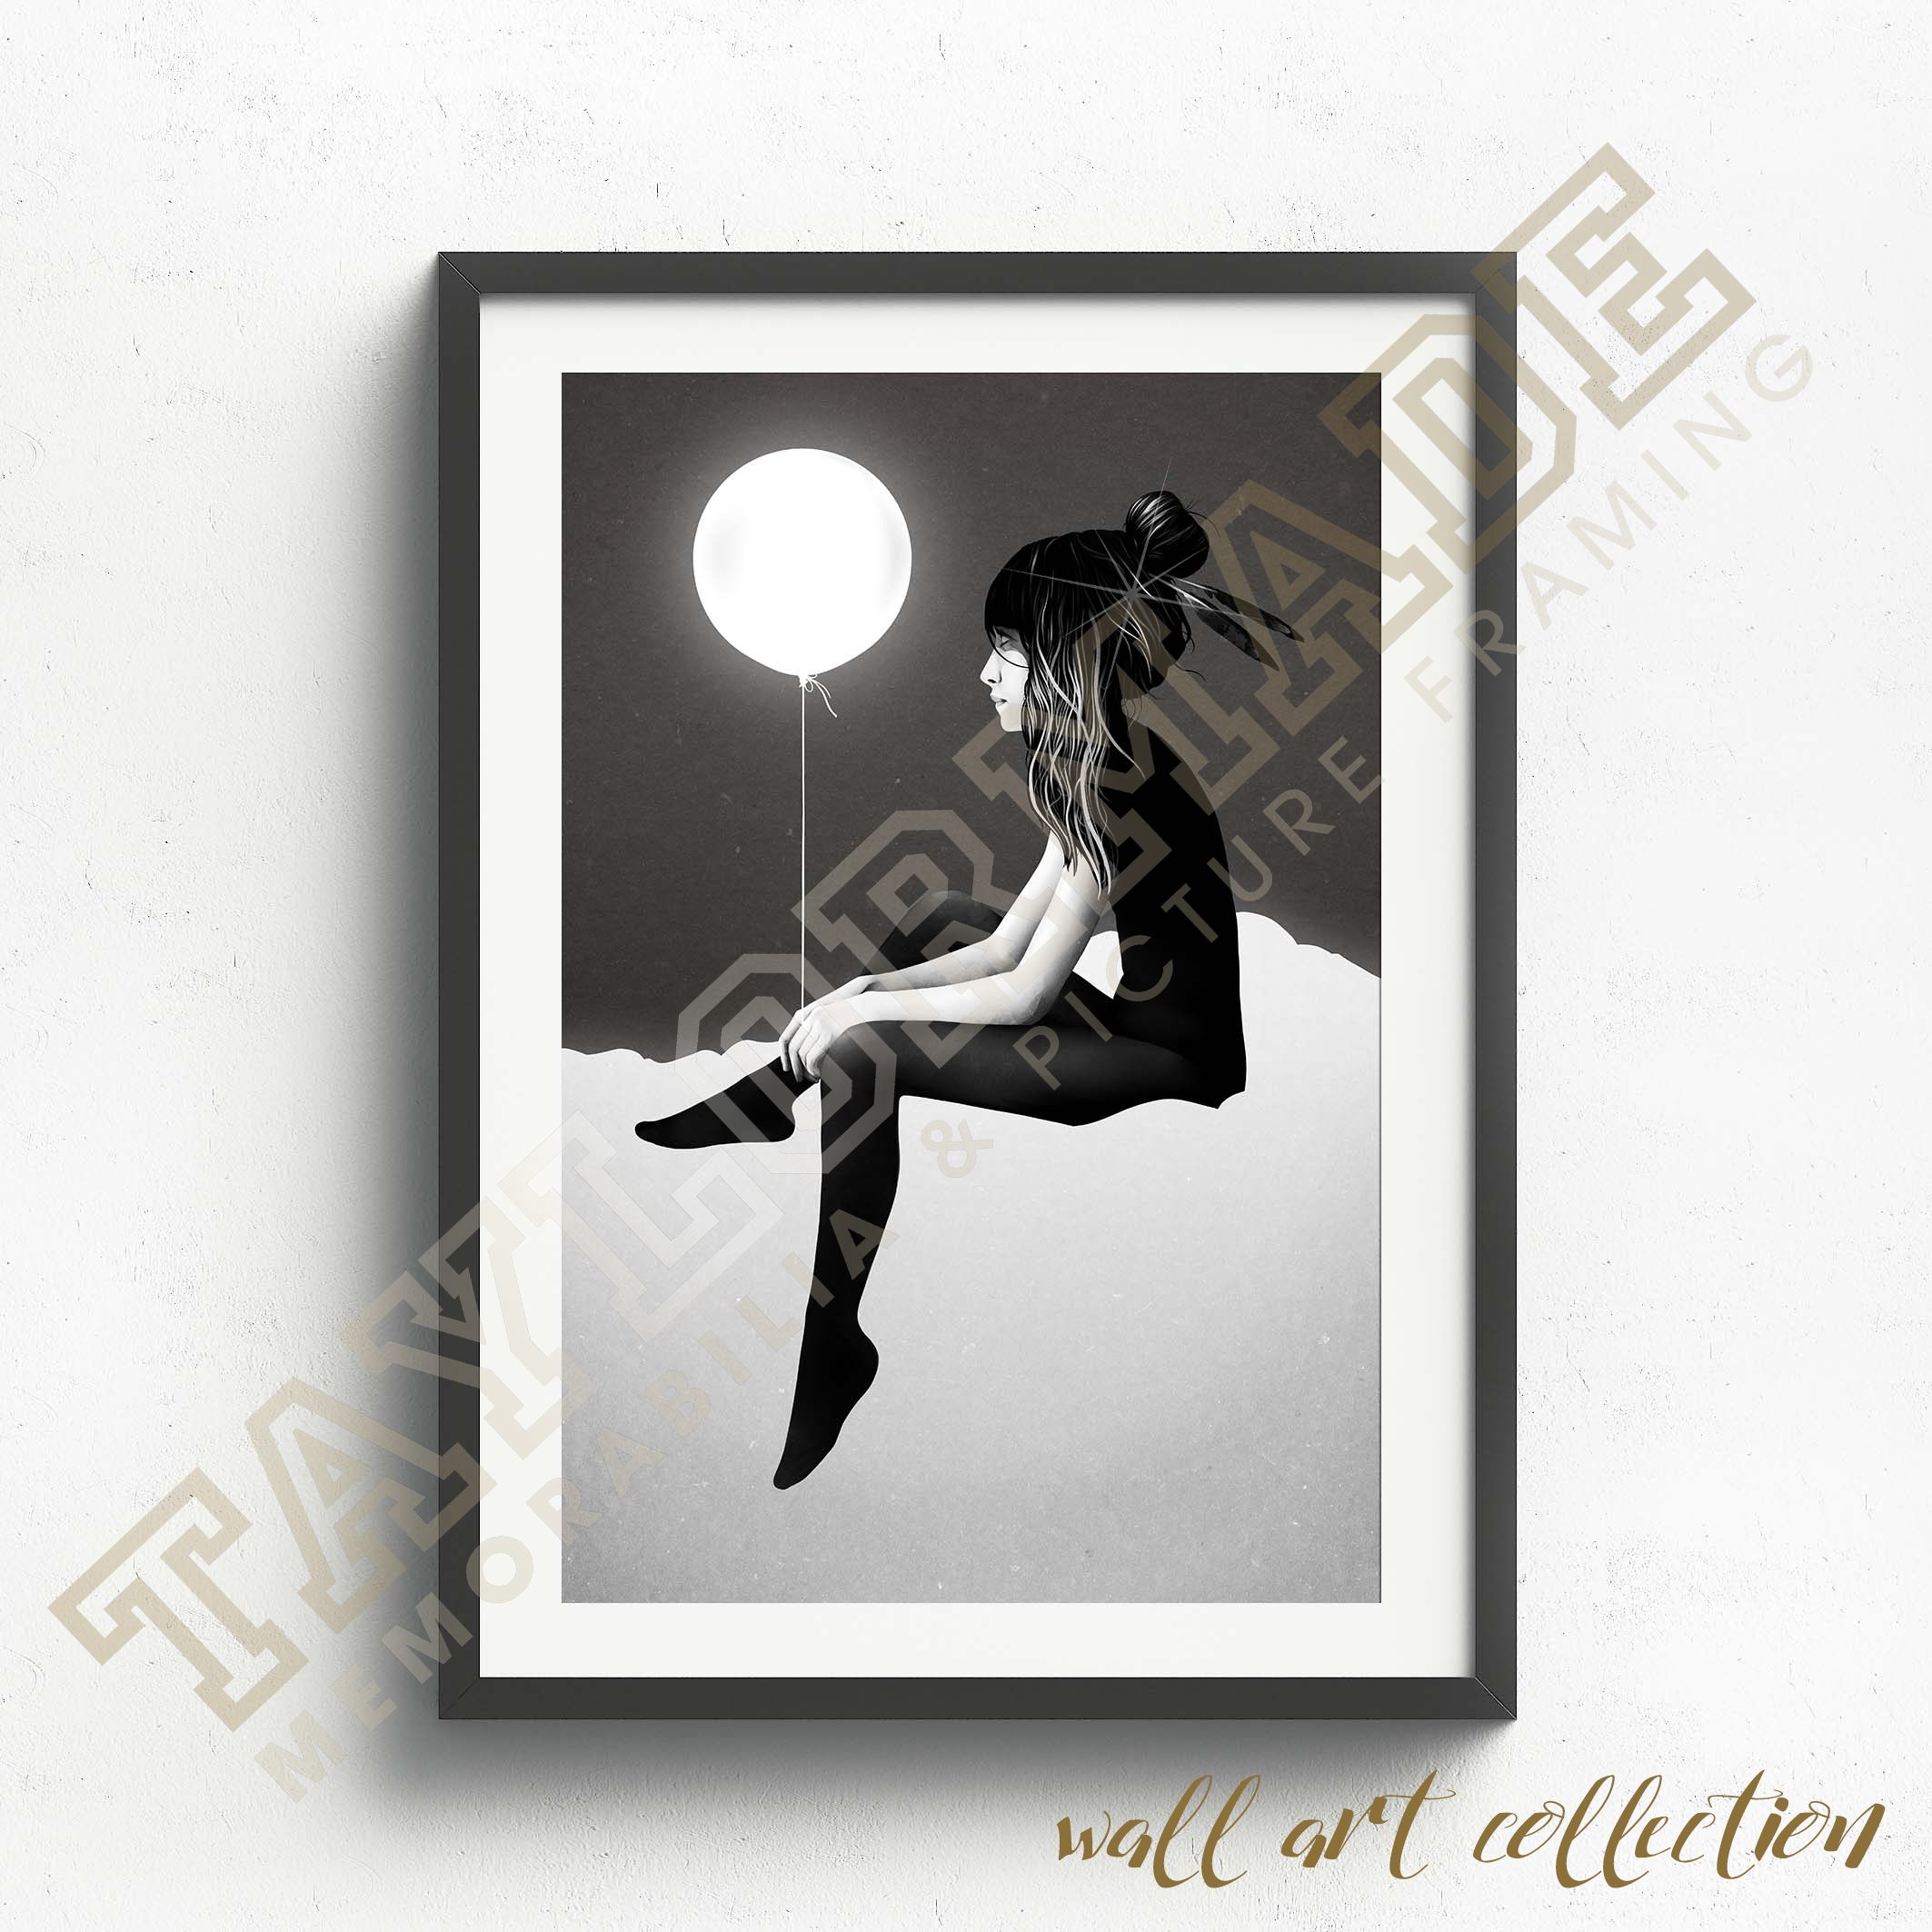 Wall Art Collection – No Such Thing (Night)